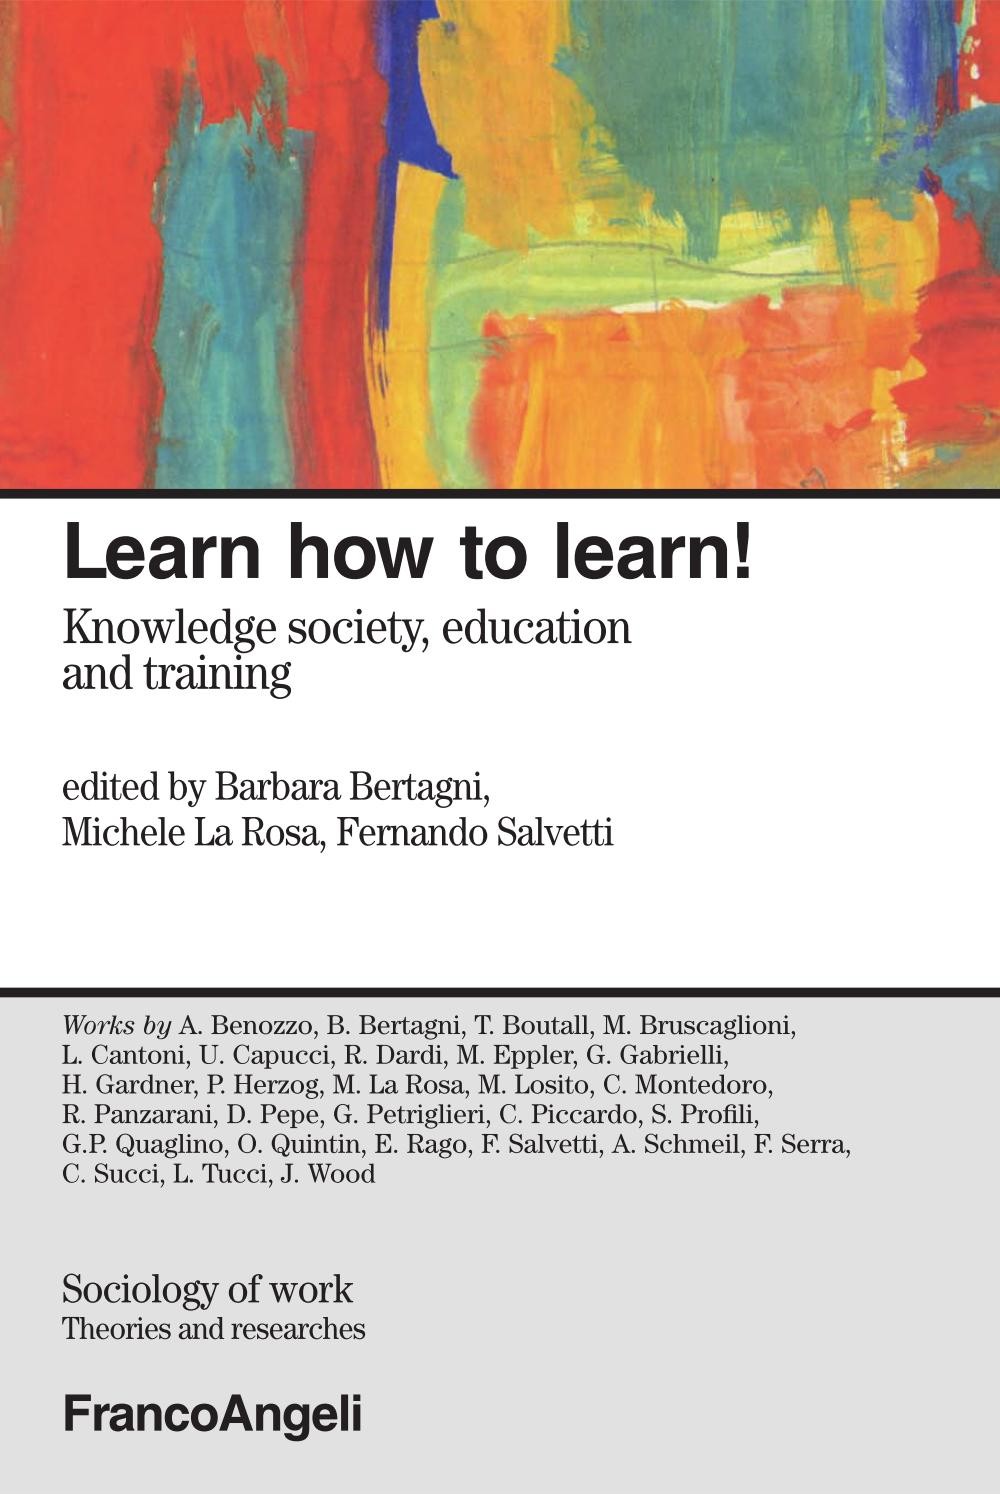 Learn how to learn! Knowledge society, education and training - Librerie.coop